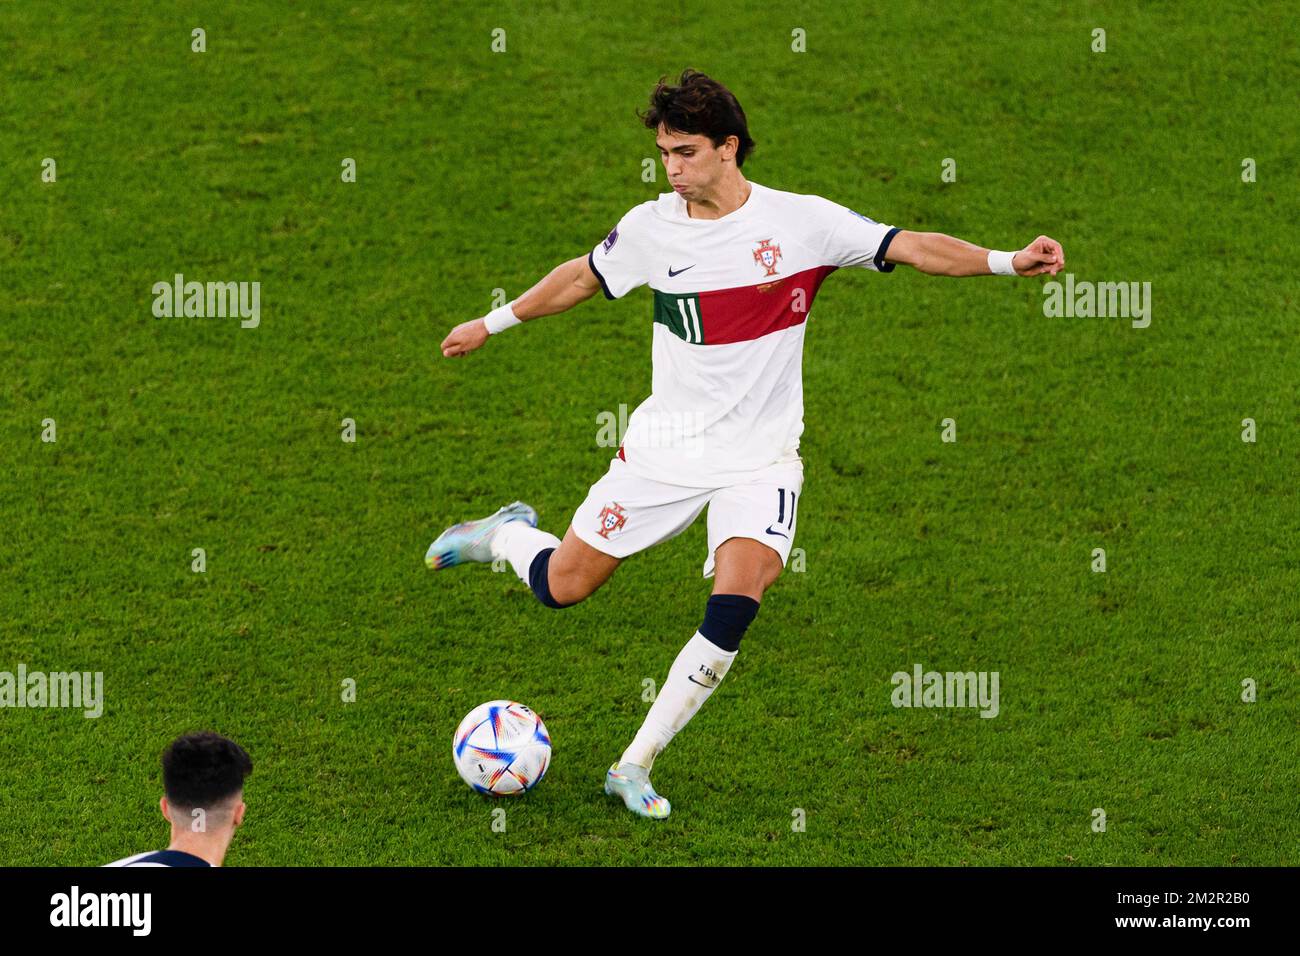 Doha, Qatar. 10th Dec, 2022. Al Thumama Stadium Joao Felix of Portugal during the match between Morocco x Portugal, valid for the World Cup quarterfinals, held at Al Thumama Stadium in Doha, Qatar. (Marcio Machado/SPP) Credit: SPP Sport Press Photo. /Alamy Live News Stock Photo